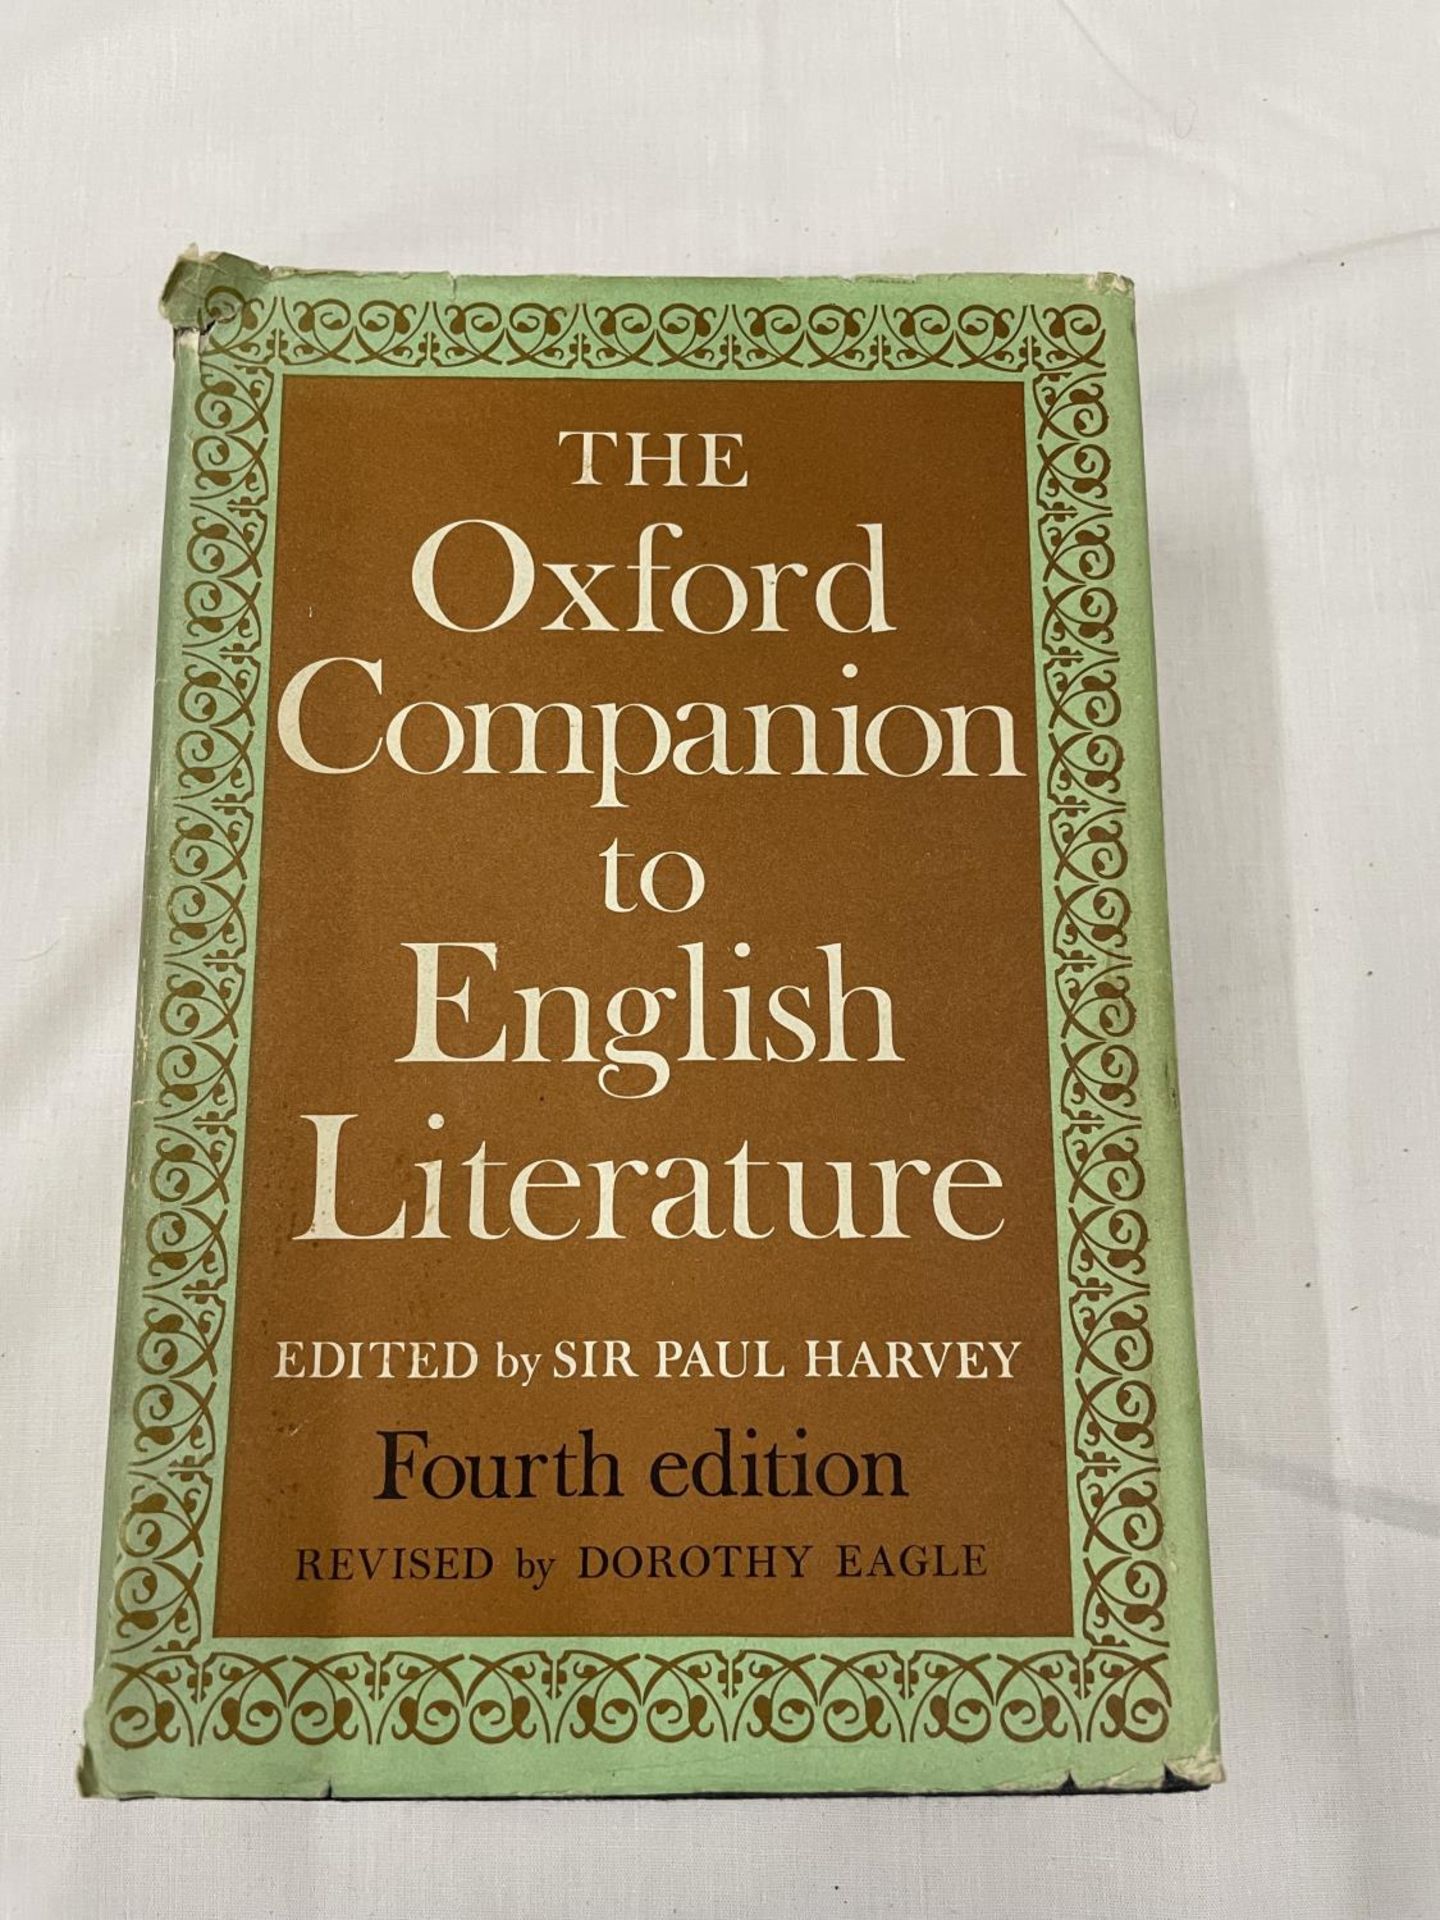 AN OXFORD COMPANION TO ENGLISH LITERATURE EDITED BY SIR PAUL HARVEY FOURTH EDITION REVISED BY